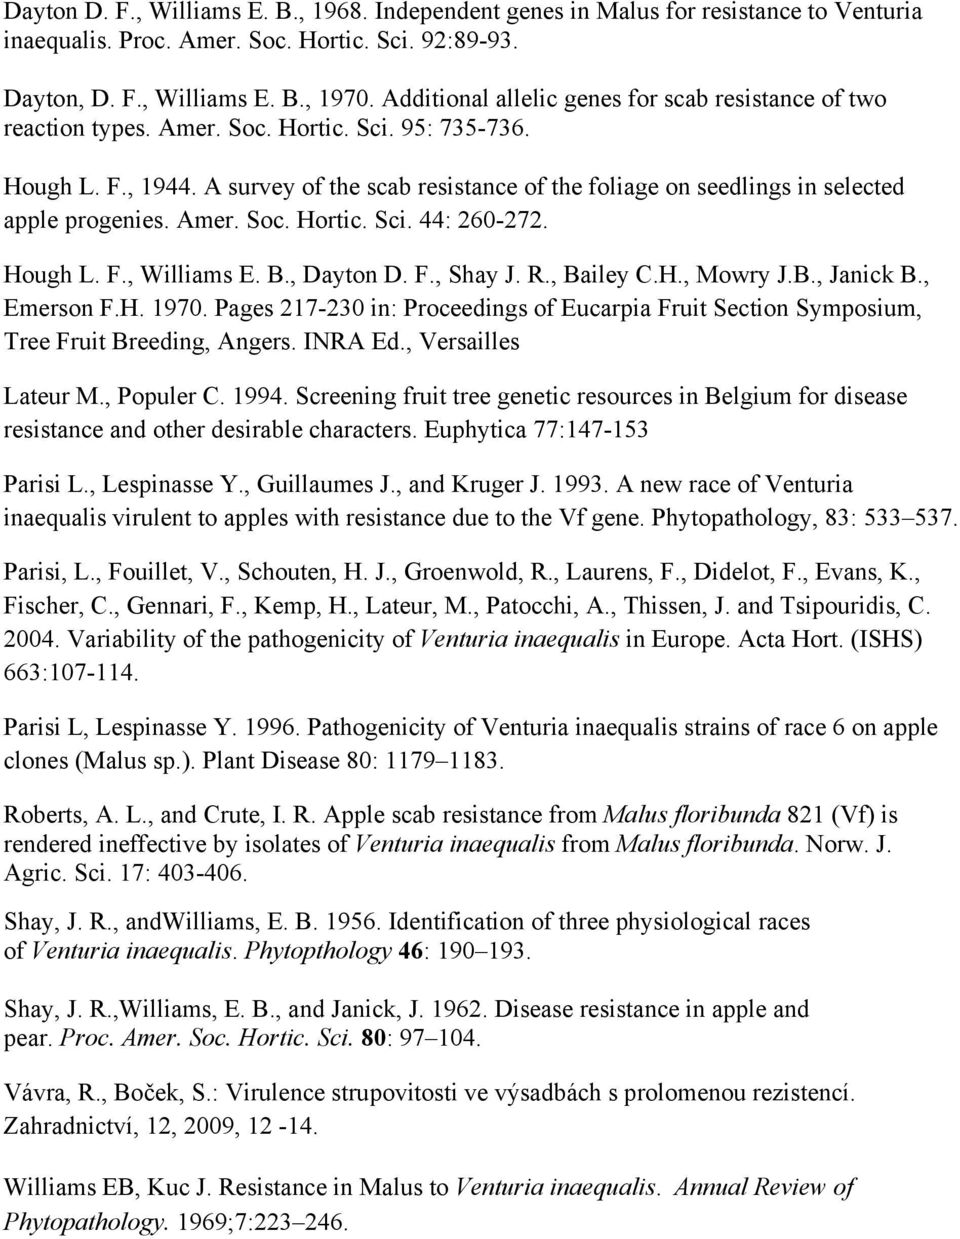 A survey of the scab resistance of the foliage on seedlings in selected apple progenies. Amer. Soc. Hortic. Sci. 44: 260-272. Hough L. F., Williams E. B., Dayton D. F., Shay J. R., Bailey C.H., Mowry J.